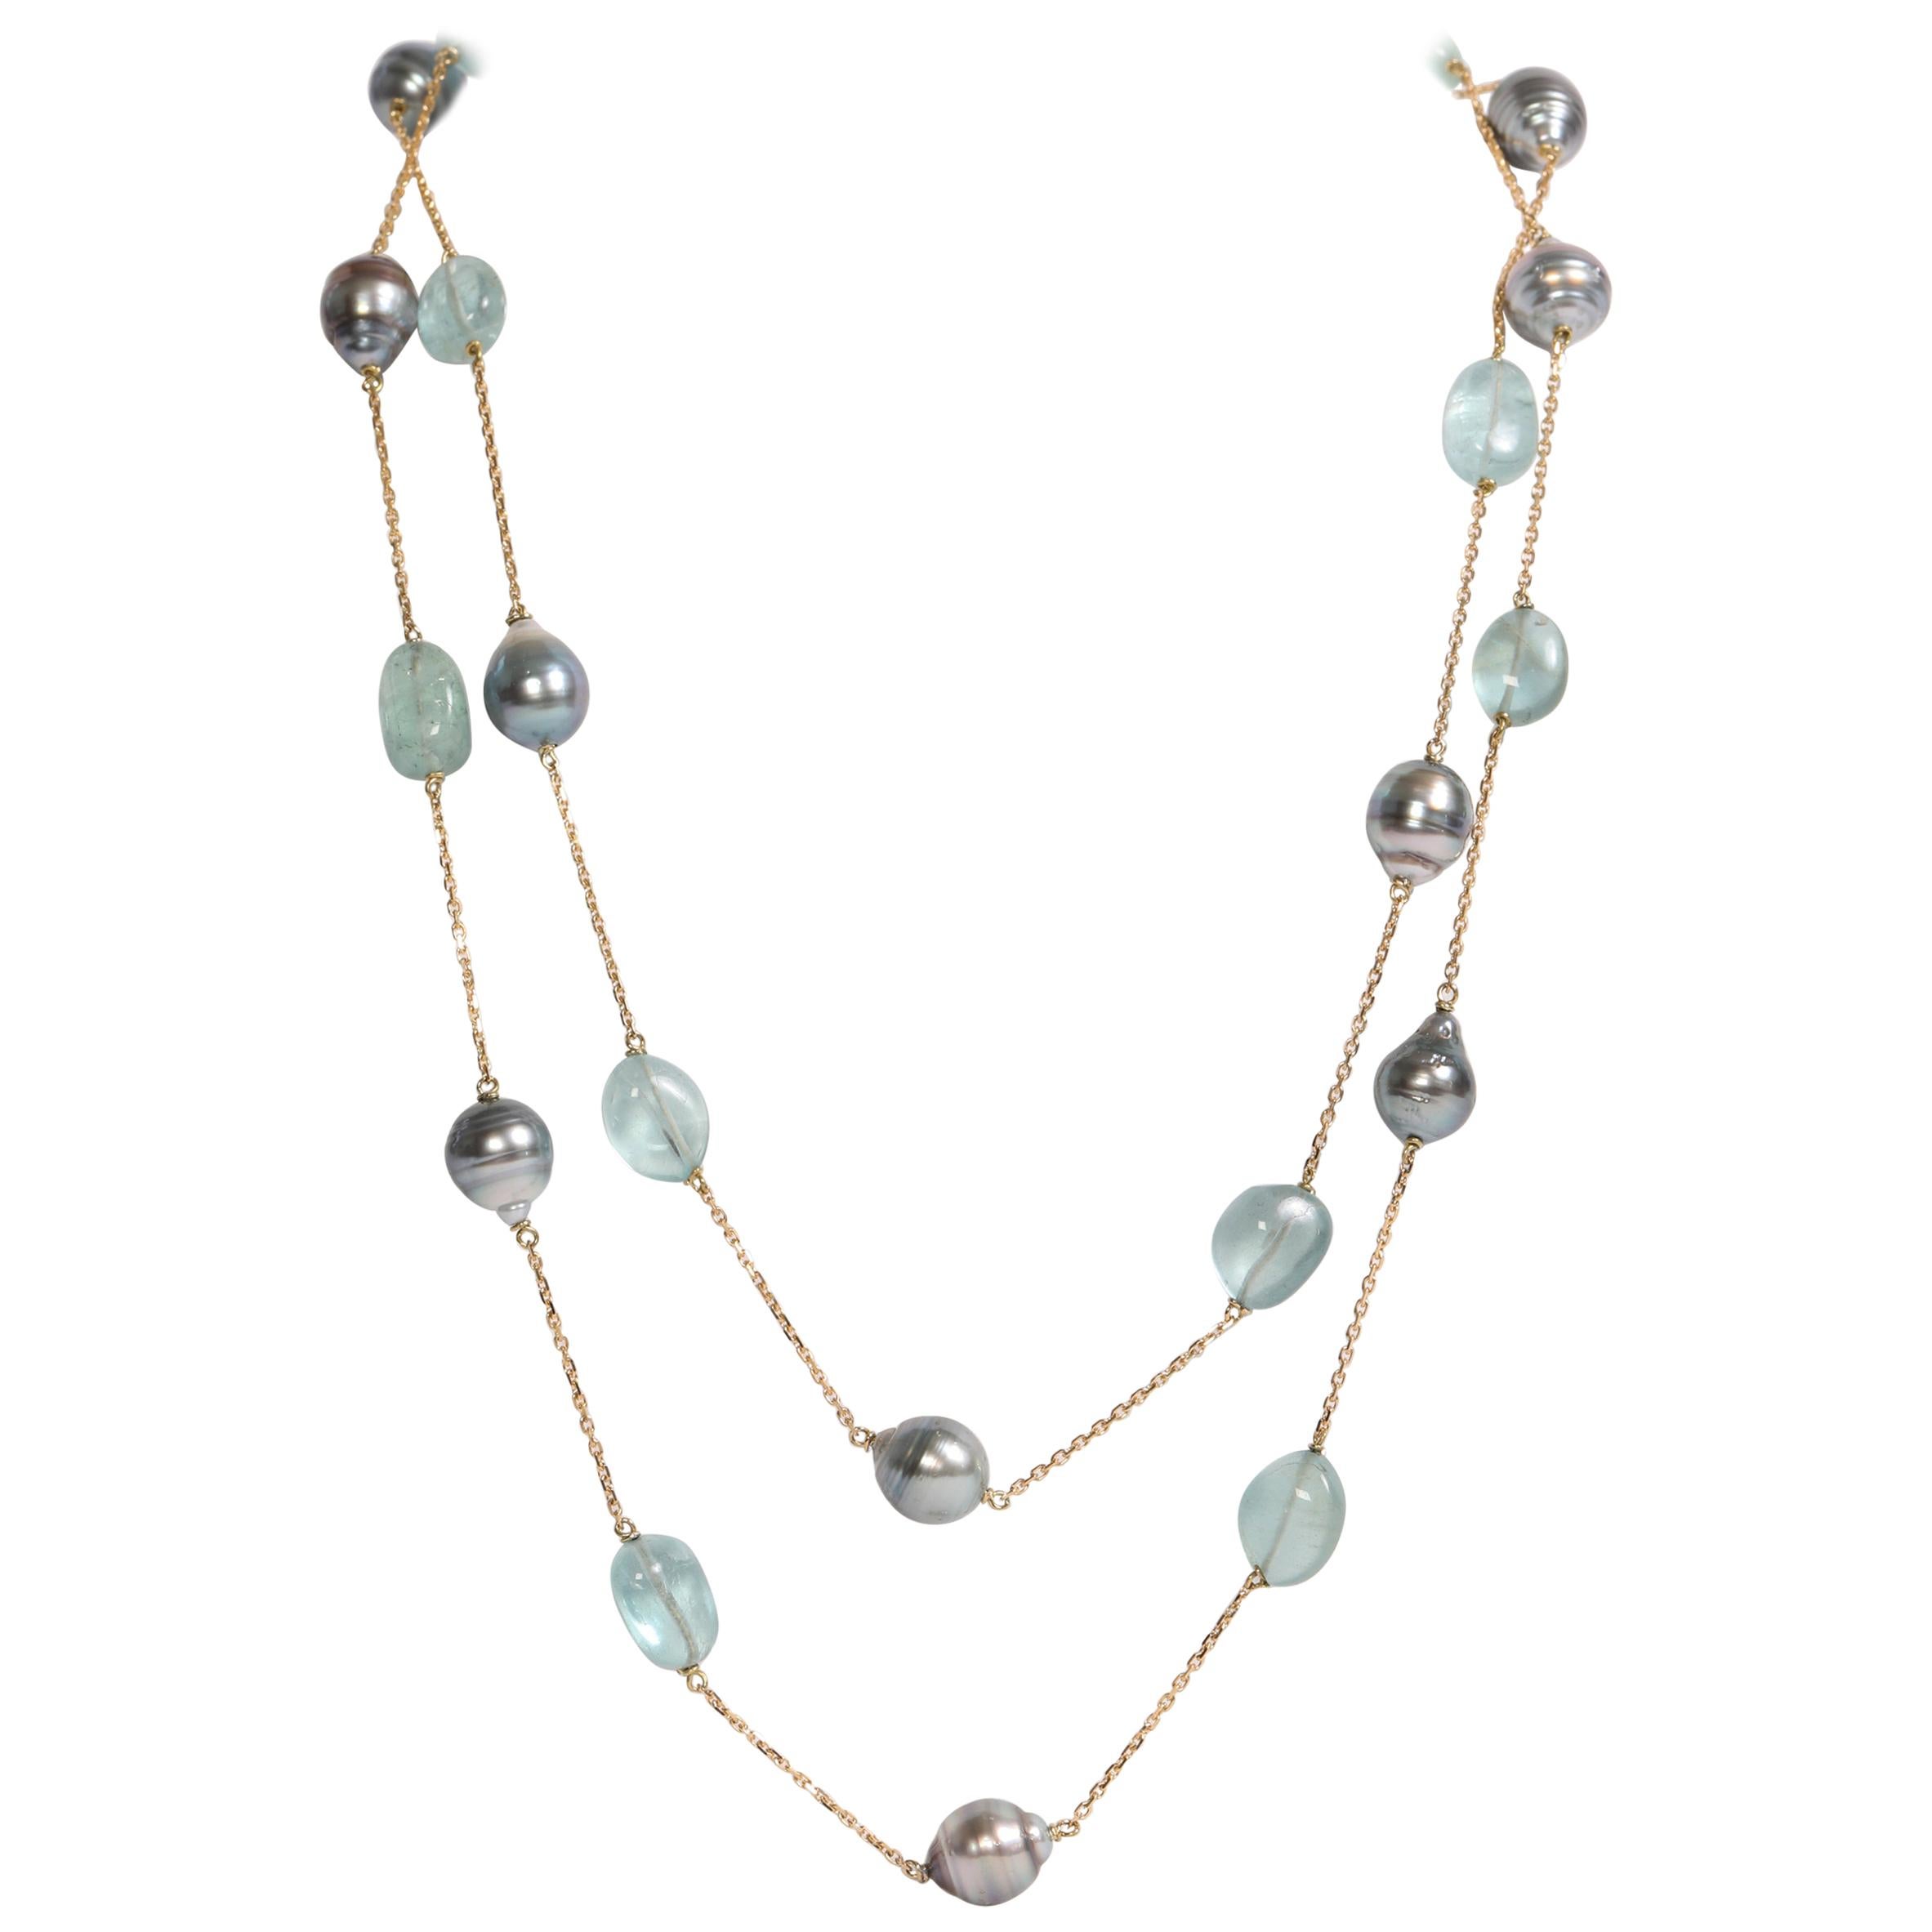 Baroque Tahiti Pearls and Aquamarine Long Necklace Created by Marion Jeantet